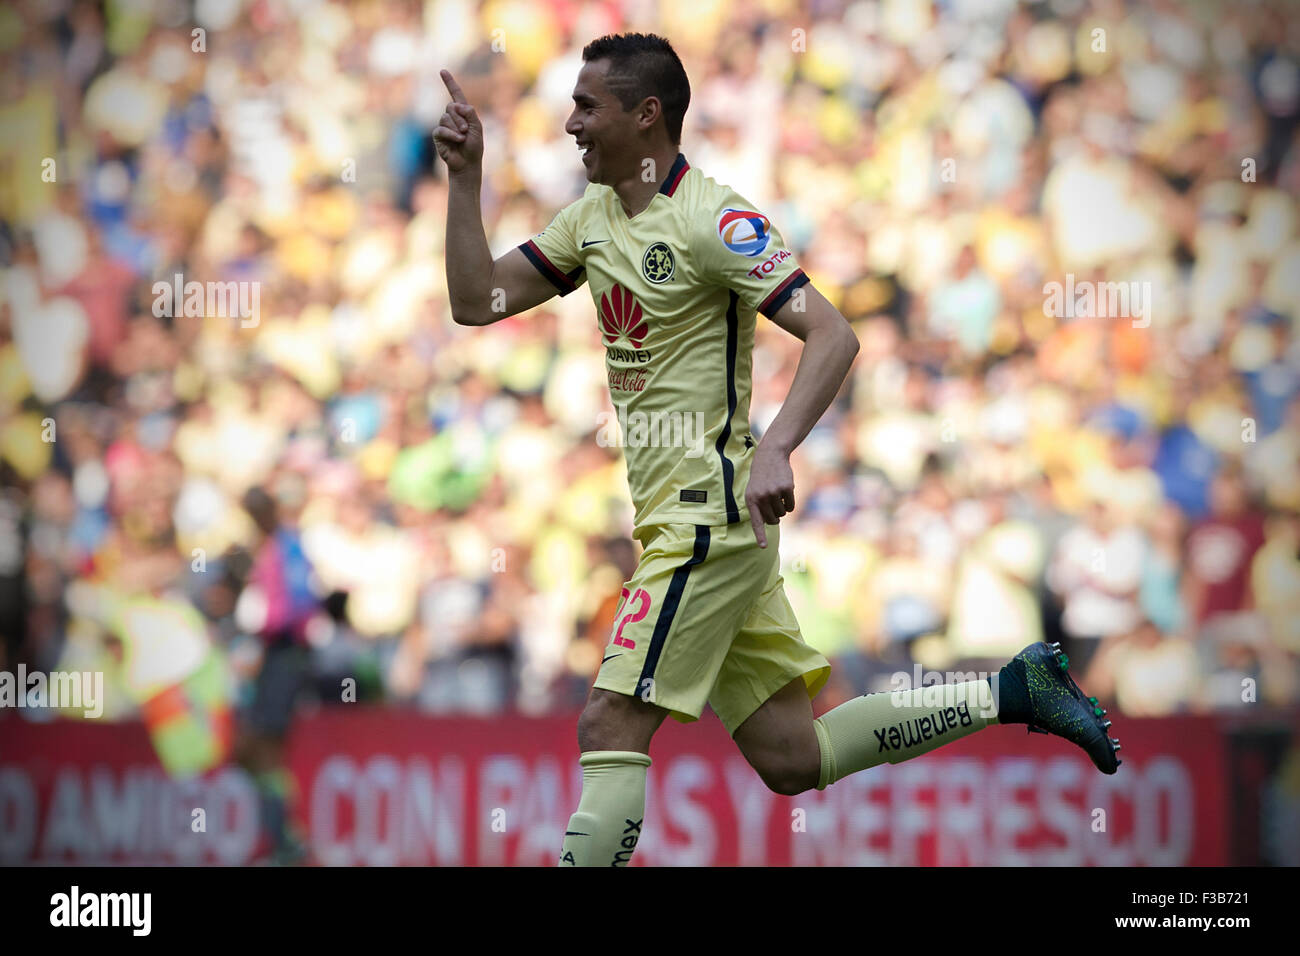 Mexico City, Mexico. 3rd Oct, 2015. America's Paul Aguilar celebrates scoring during the match against Jaguares of the 2015 Opening Tournament of the MX League held in the Azteca Stadium, in Mexico City, capital of Mexico, on Oct. 3, 2015. America won the match 2-1. © Jorge Rios/Xinhua/Alamy Live News Stock Photo